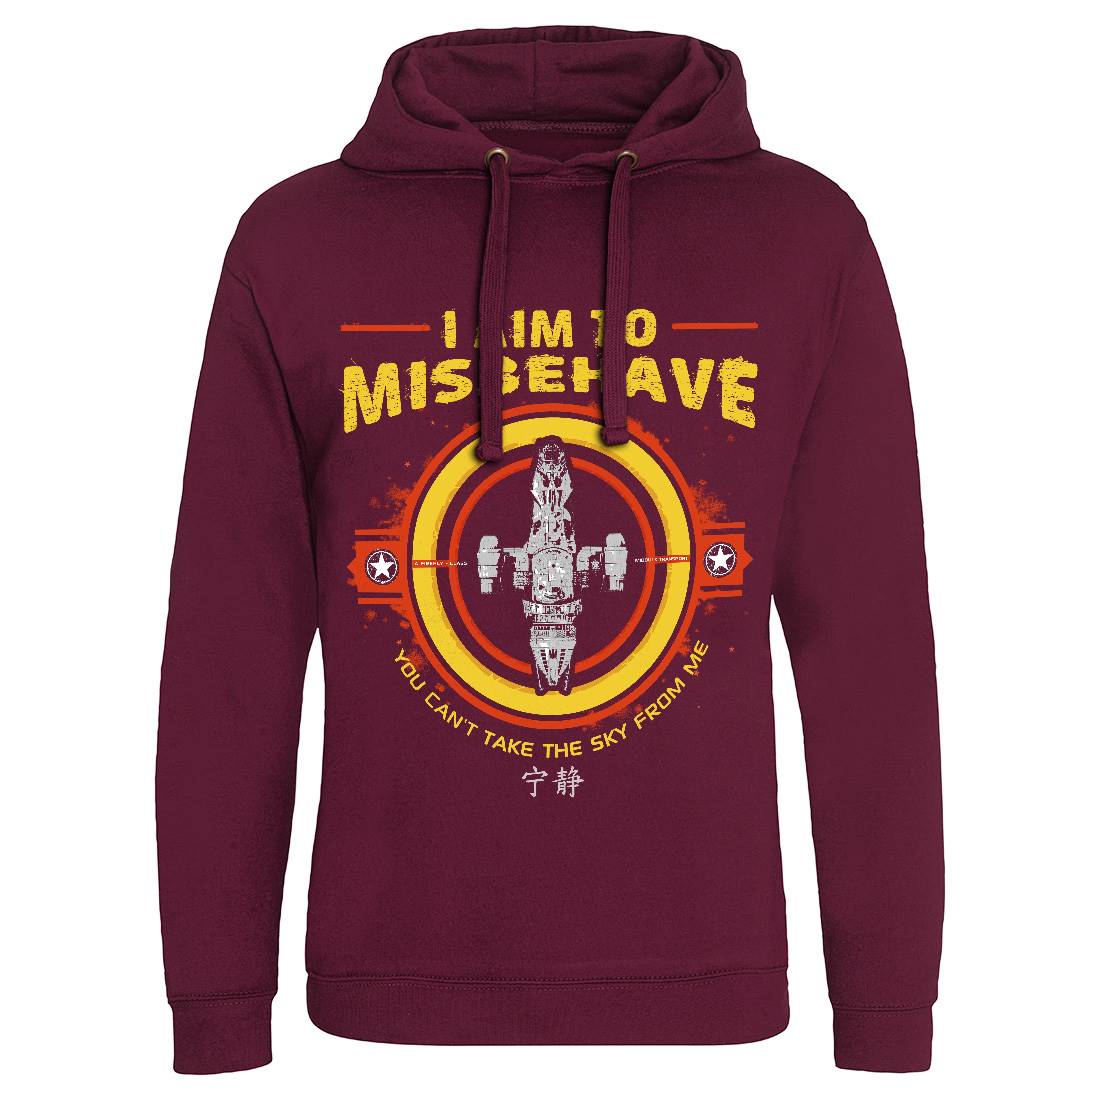 I Aim To Misbehave Mens Hoodie Without Pocket Space D352